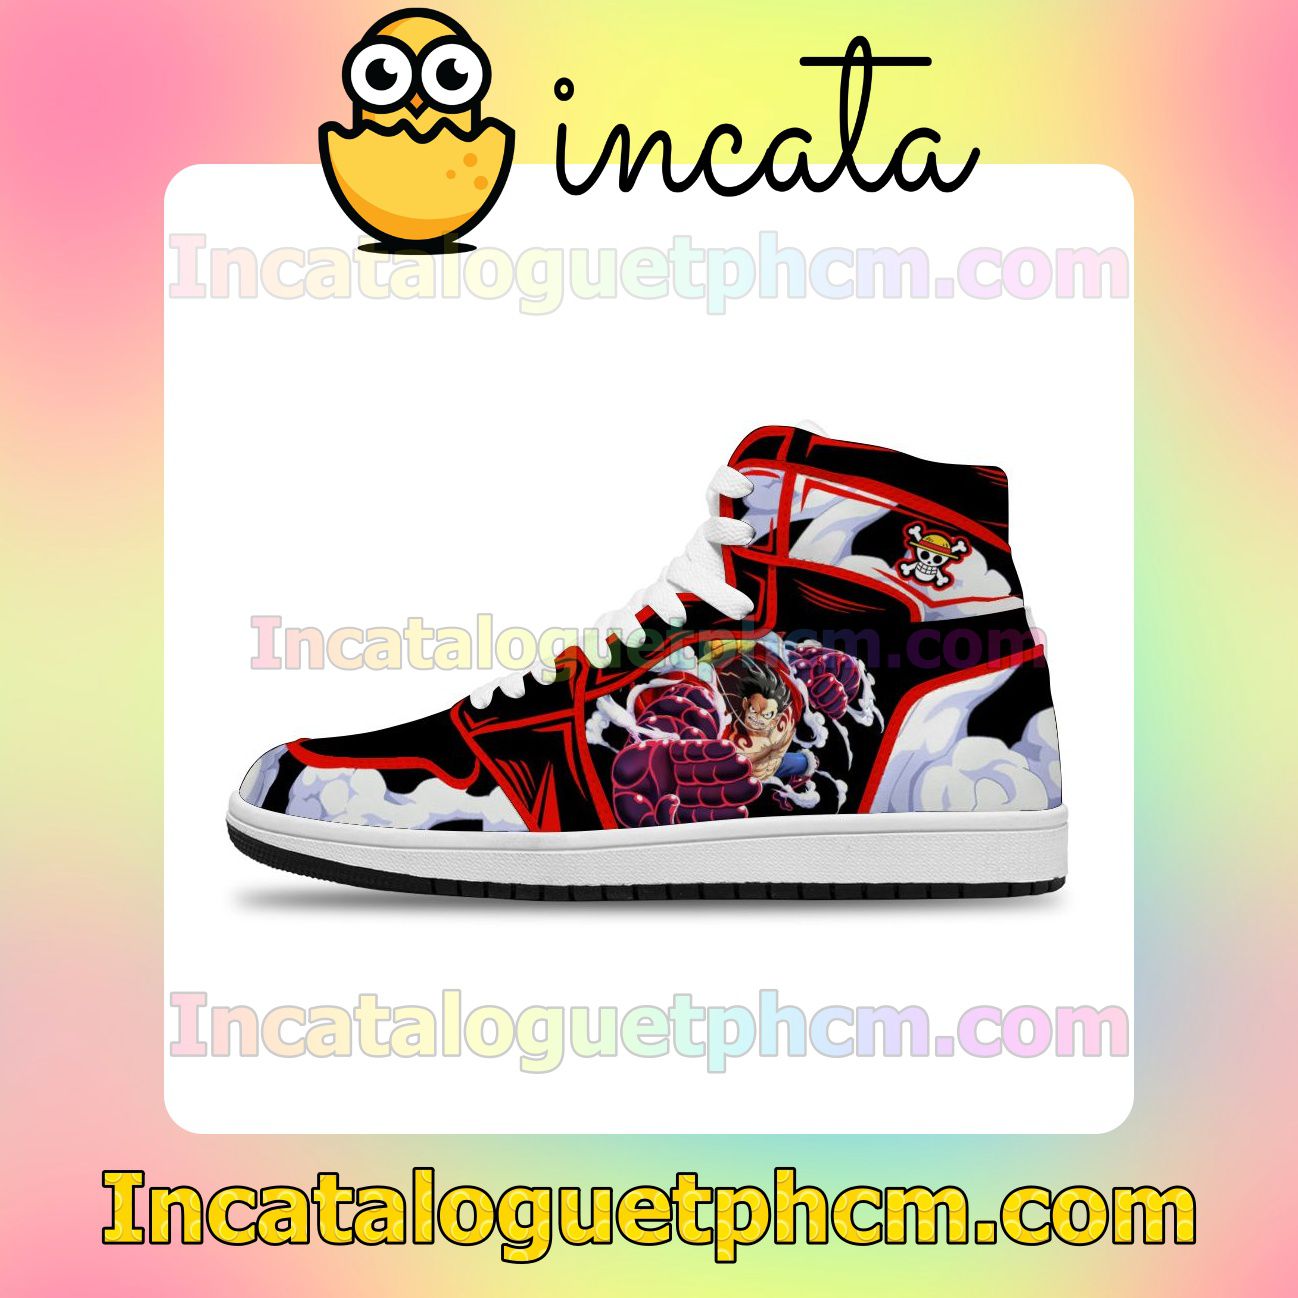 Best Personalized One Piece Custom Shoes Luffy Gear 4 Custom Snakeman Anime Air Jordan 1 Inspired Shoes